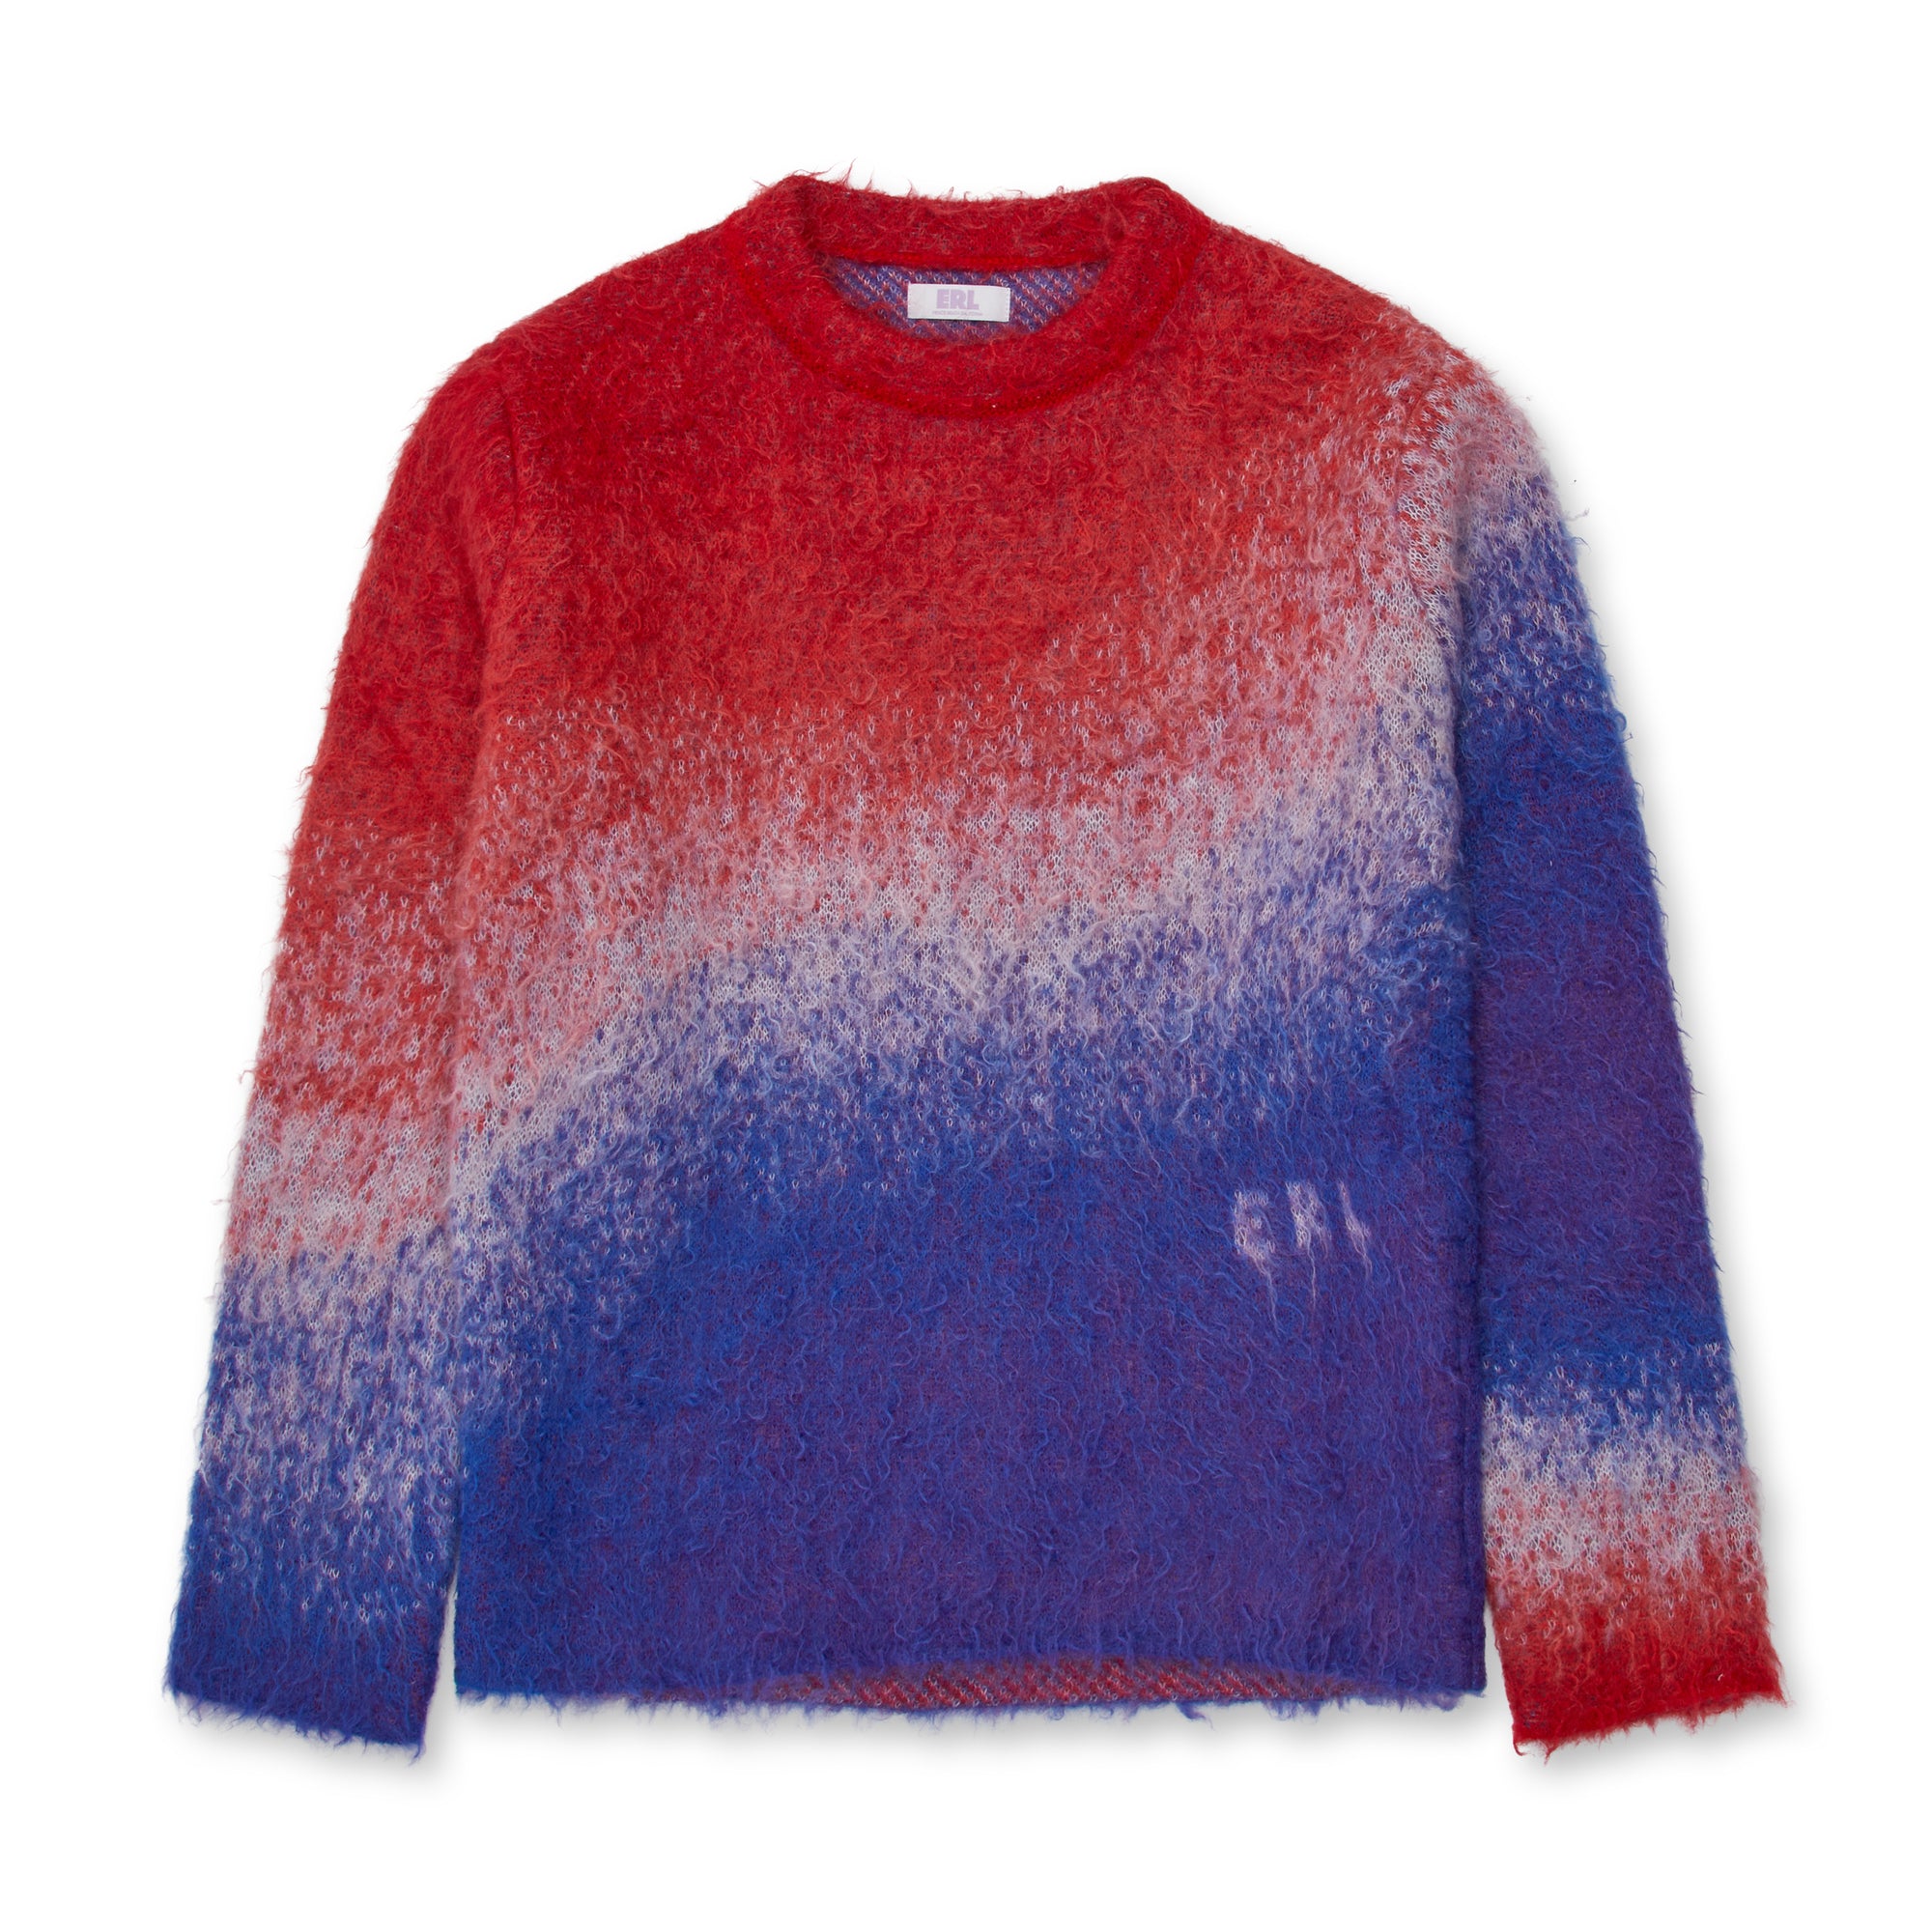 ERL - Degrade Gradient Sweater - (Blue/Red) view 1